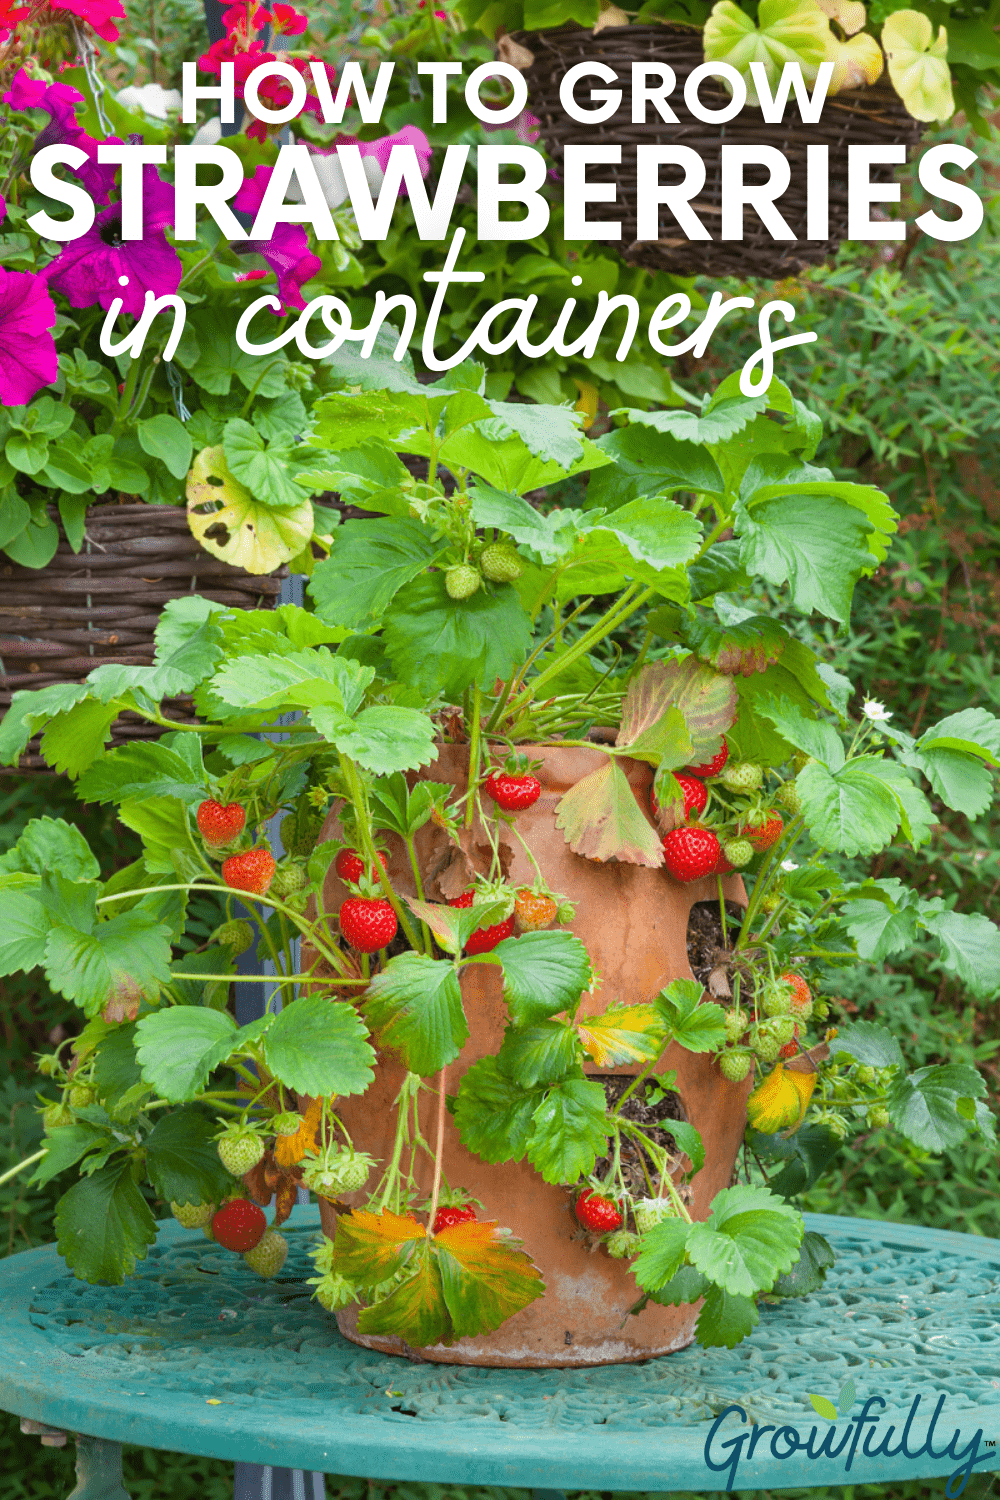 Growing Strawberries in Containers – Strawberry Plants